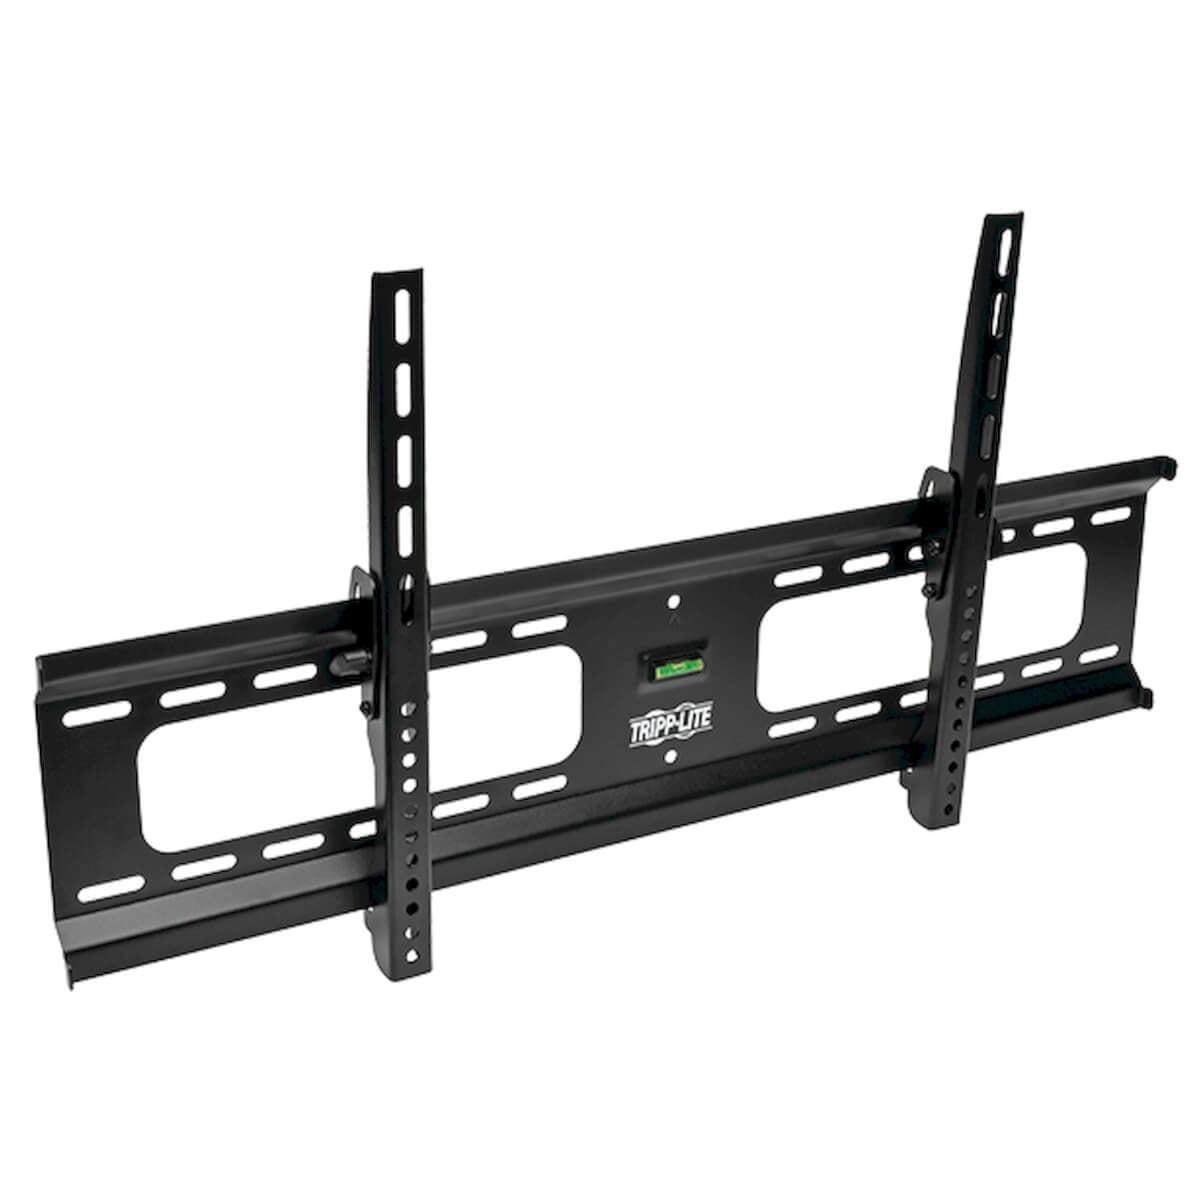 Tripp Lite Dwt3780Xul Heavy-Duty Tilt Wall Mount For 37" To 80" Tvs And Monitors, Flat Or Curved Screens, Ul Certified